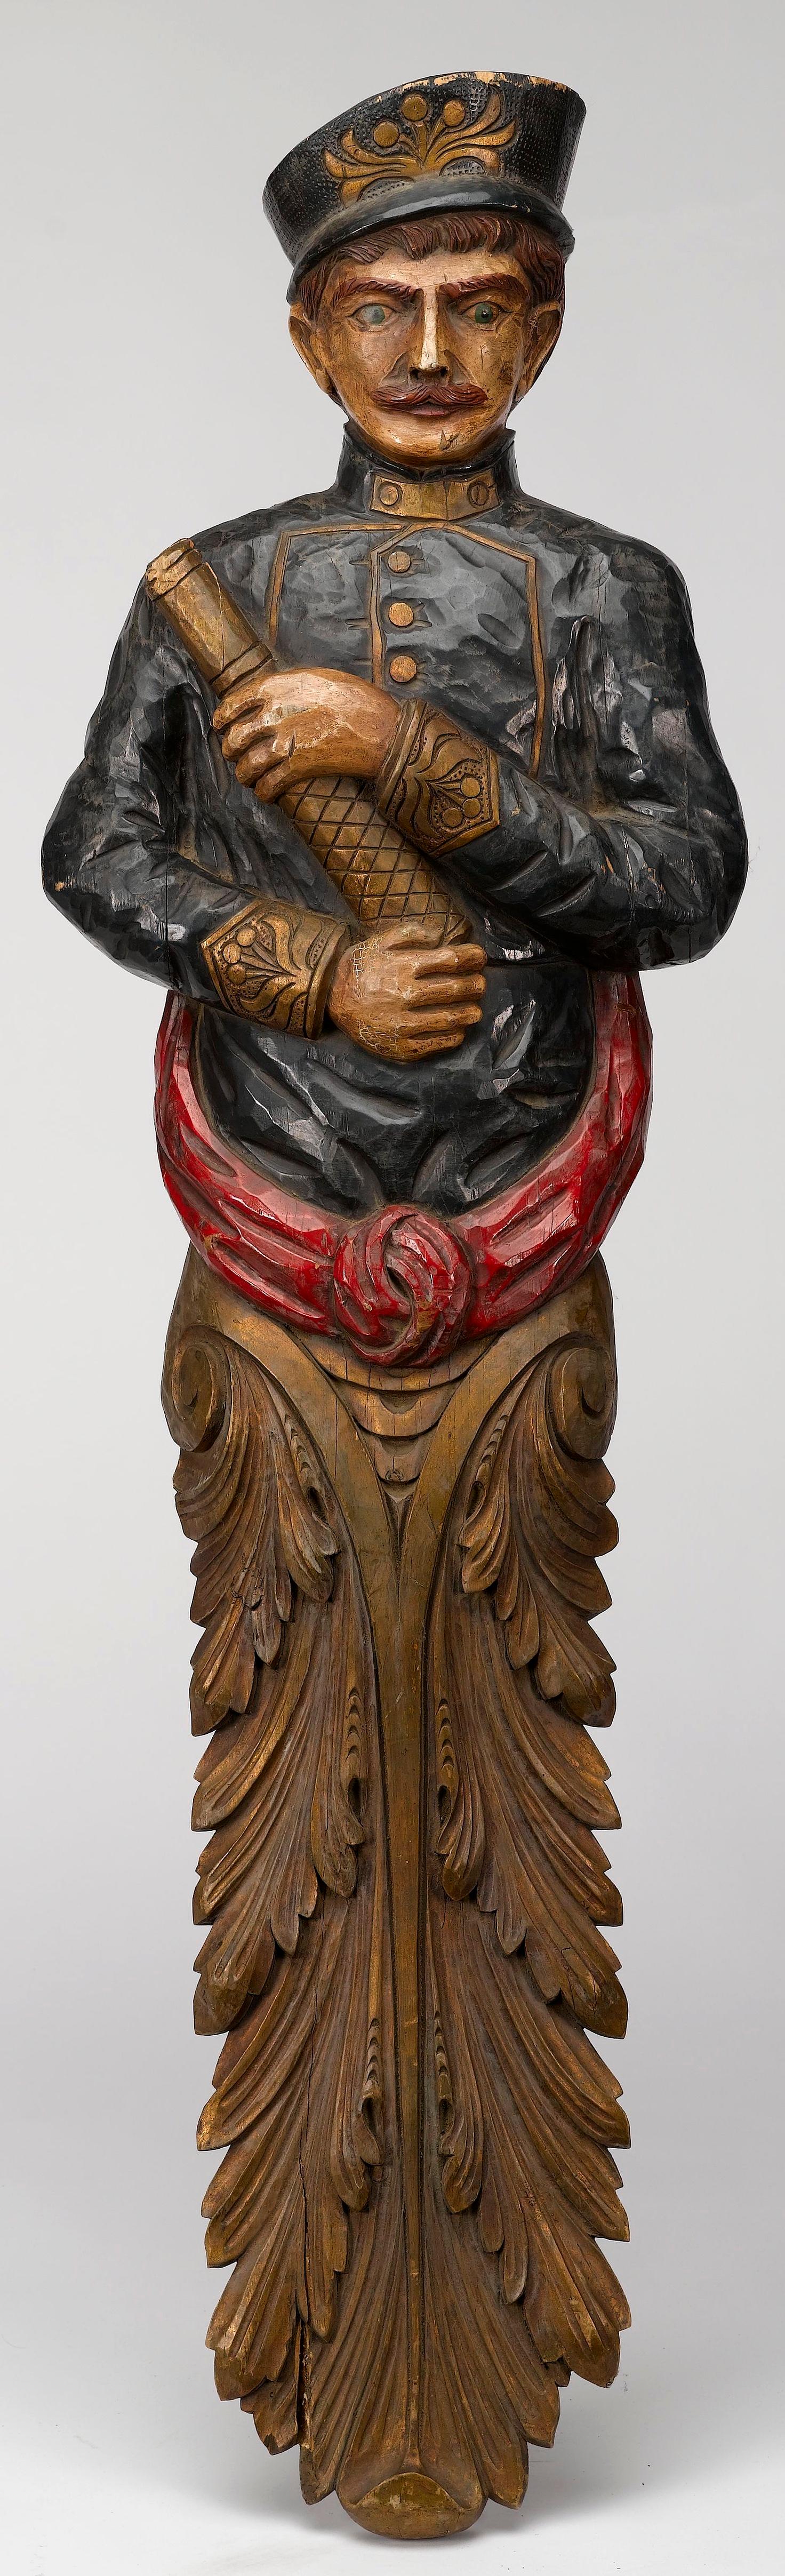 This is a beautifully crafted large antique ship figurehead, hand carved and hand painted from the 1930s. Carved in the shape of a male ship captain, the figurehead wears a blue and gold jacket, a captain’s hat, and holds a gold telescope in his